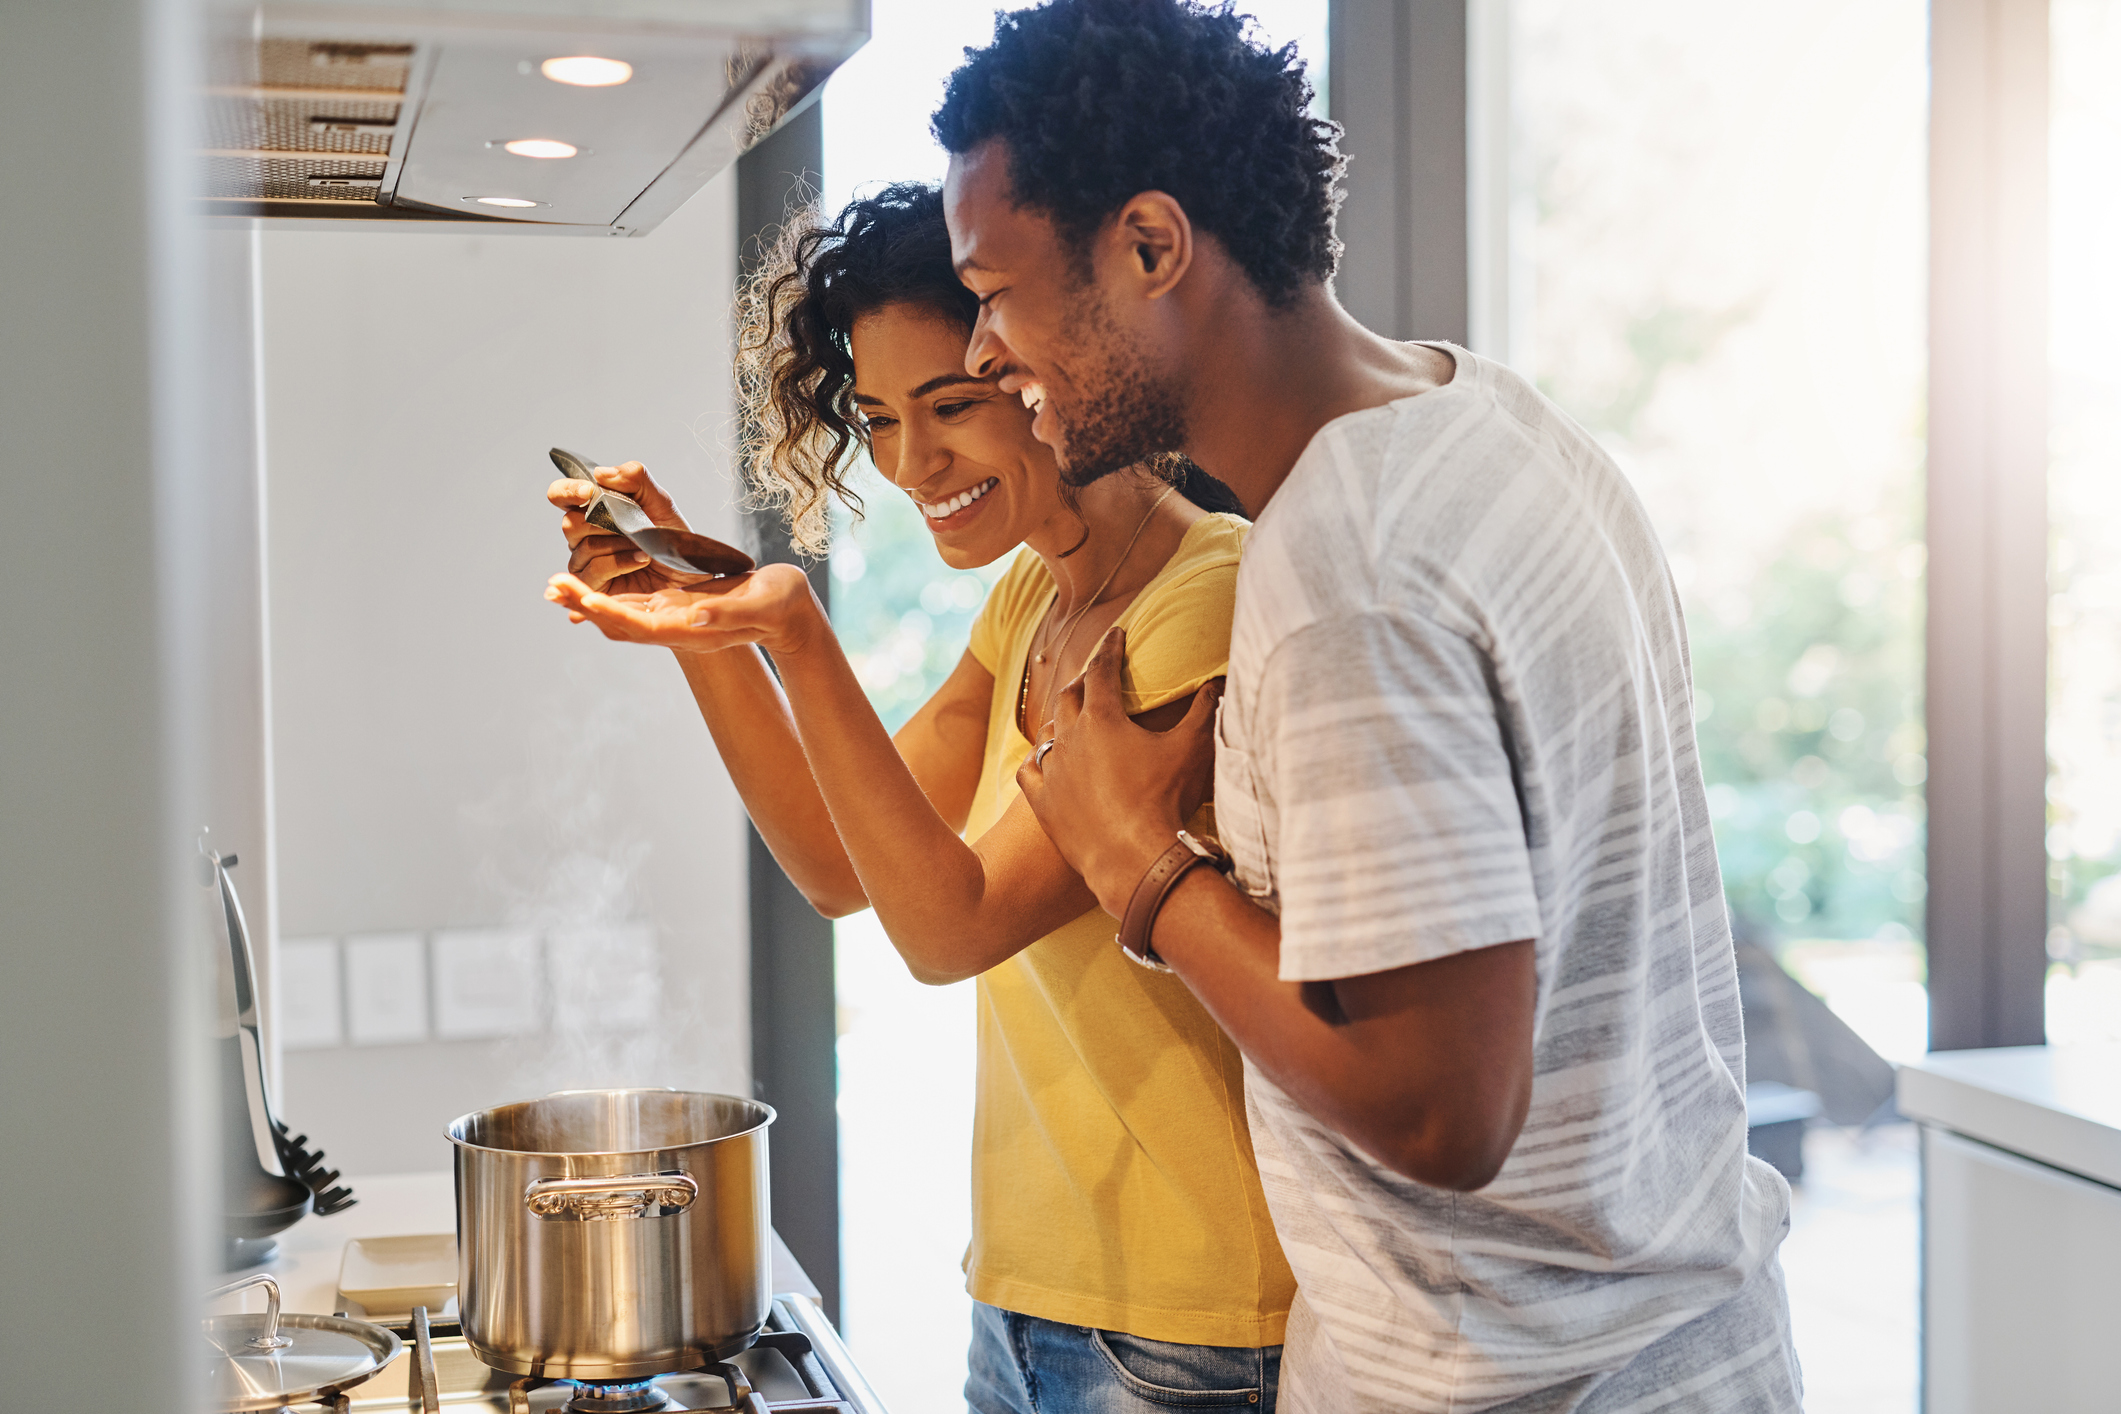 A man and woman smile and cook while trying food from a ladle